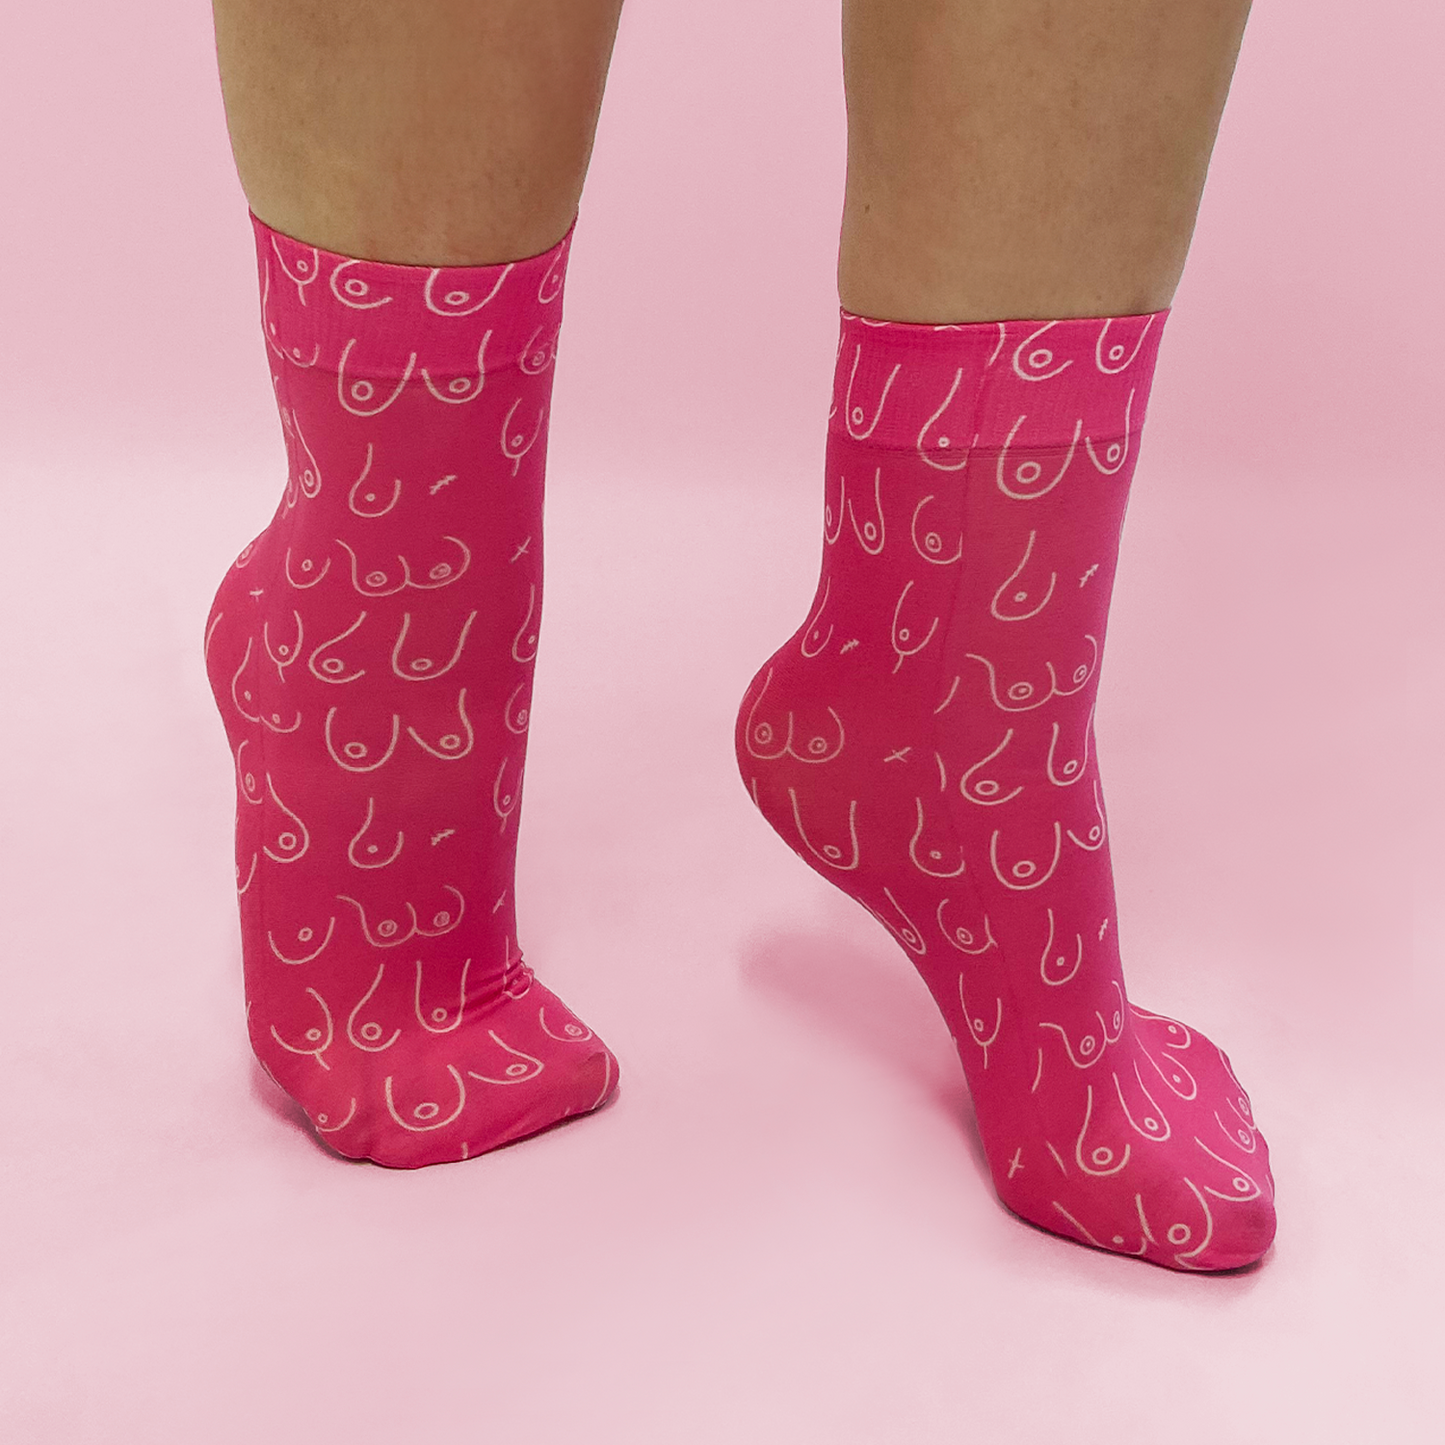 
                  
                    all over boob printed pink socks 
                  
                